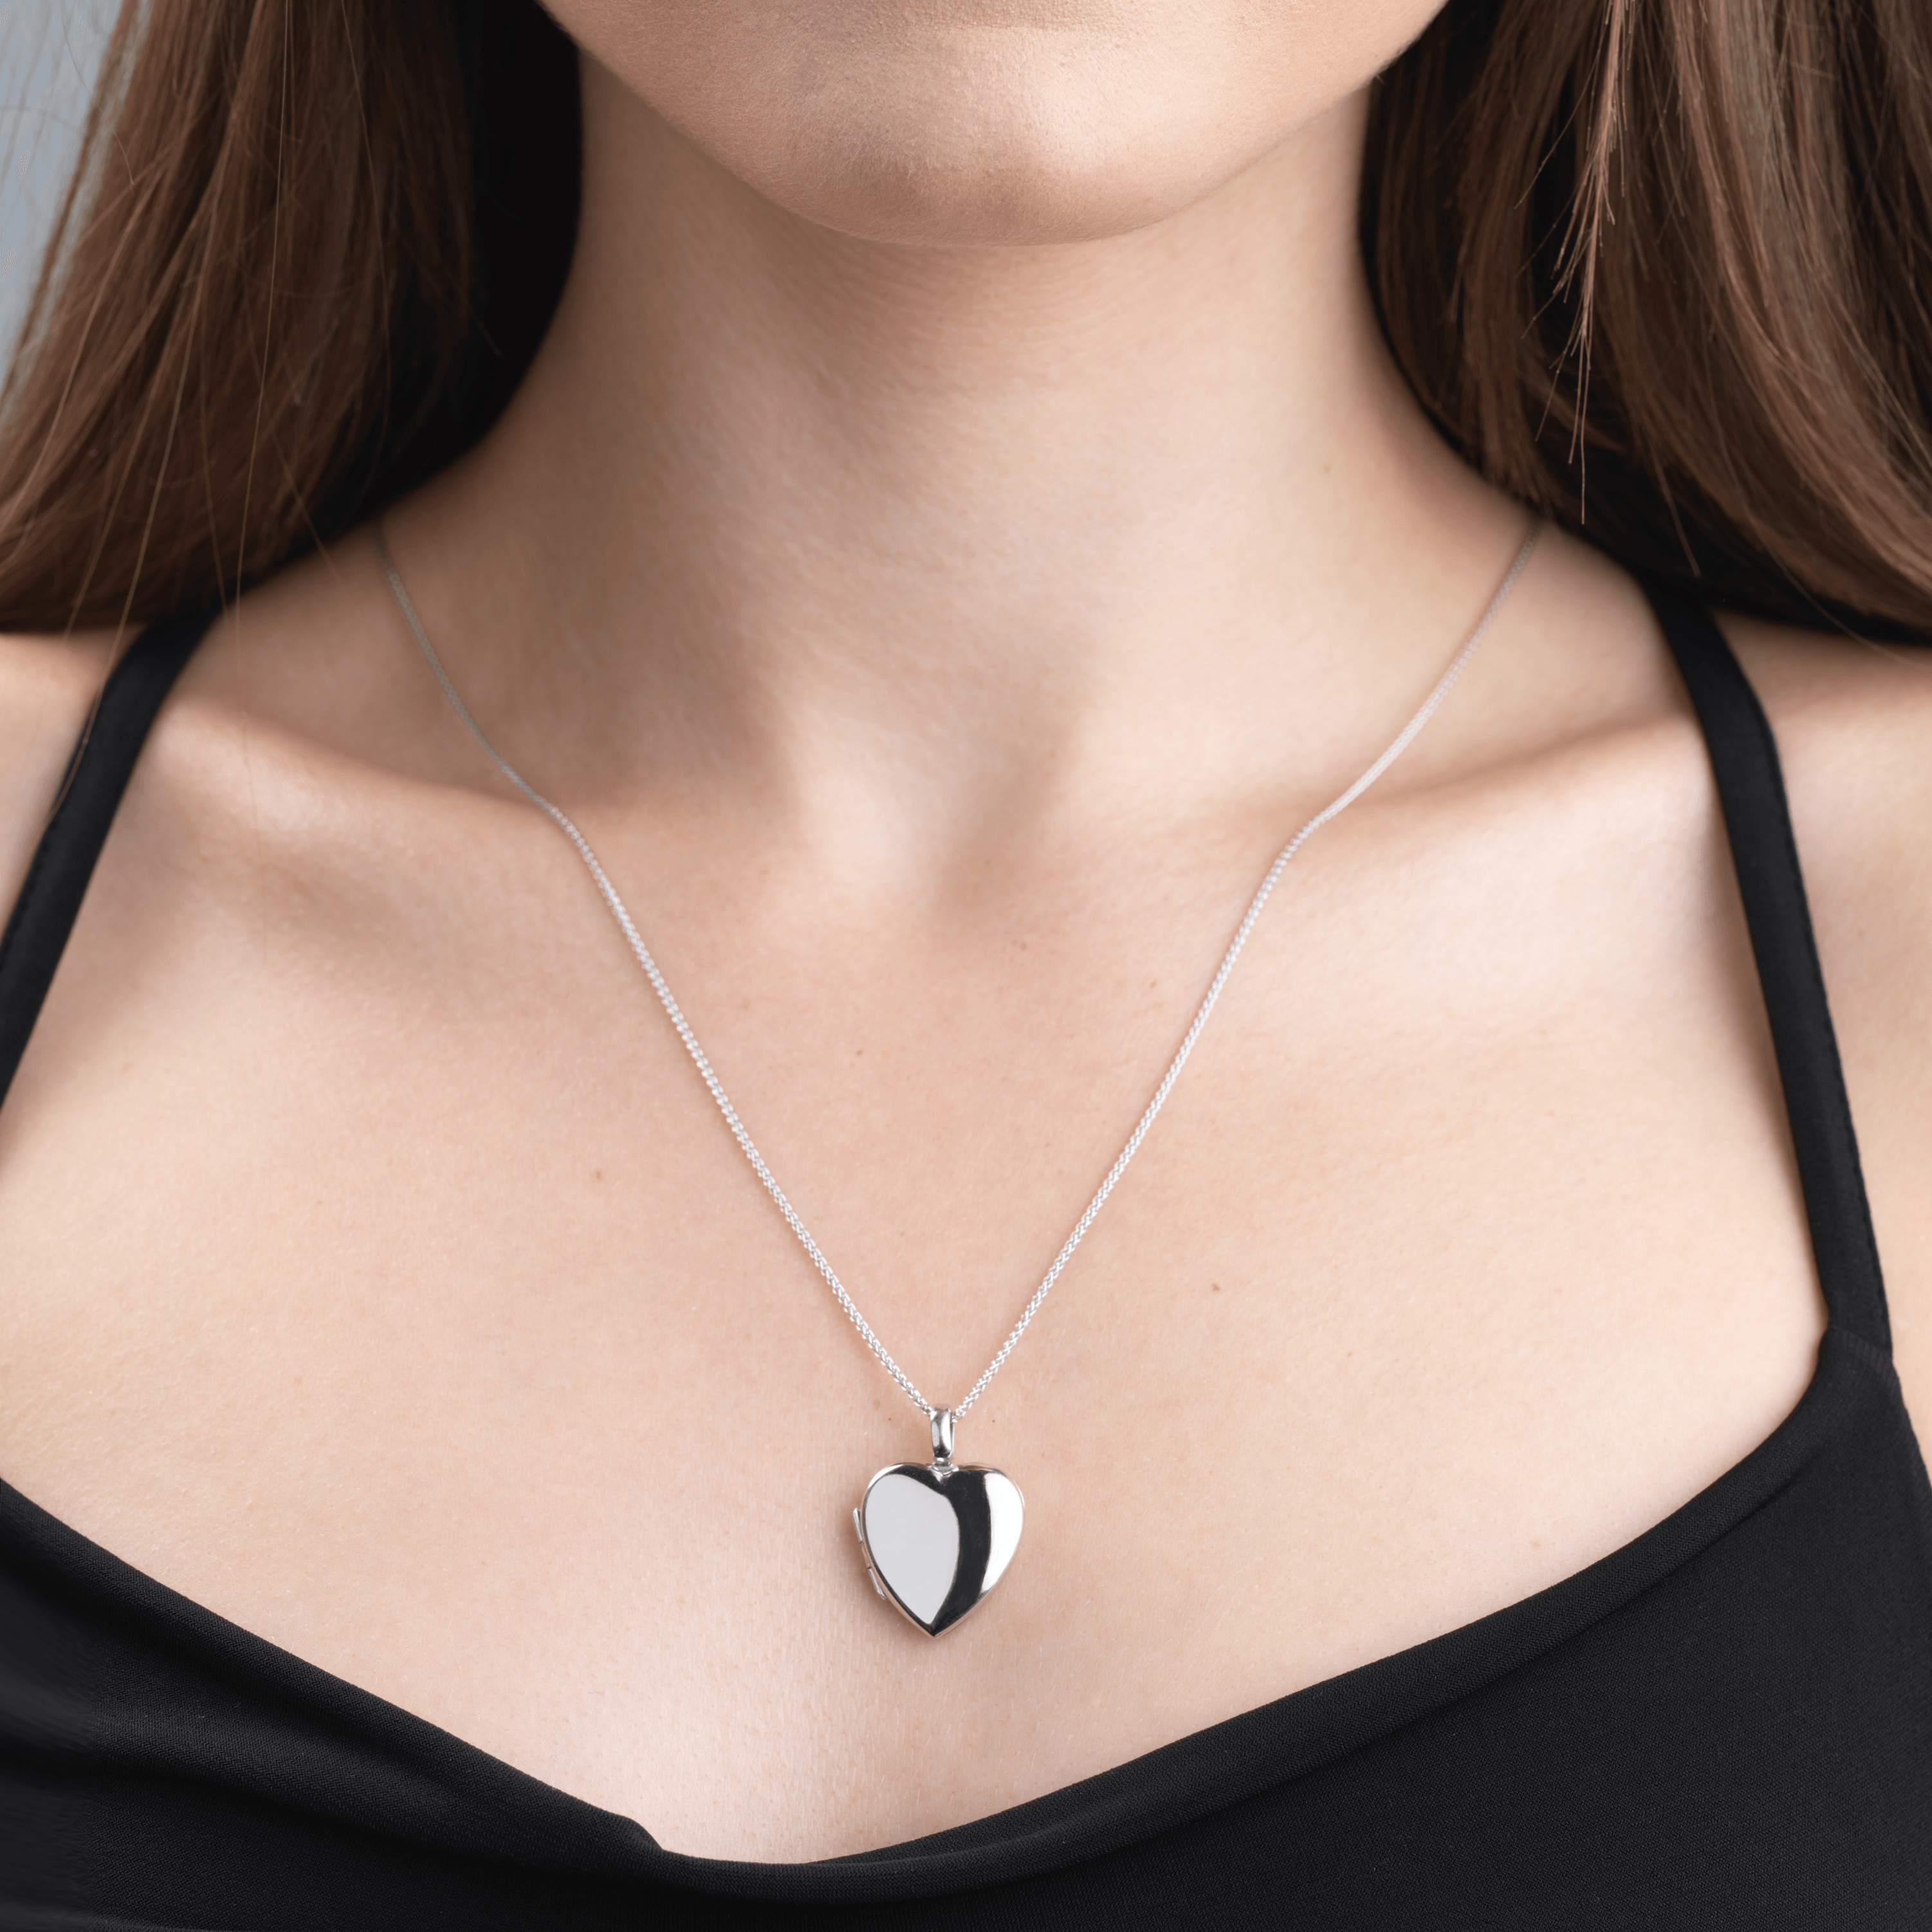 Model wearing an 18 ct white gold heart locket on an 18 ct white gold spiga chain